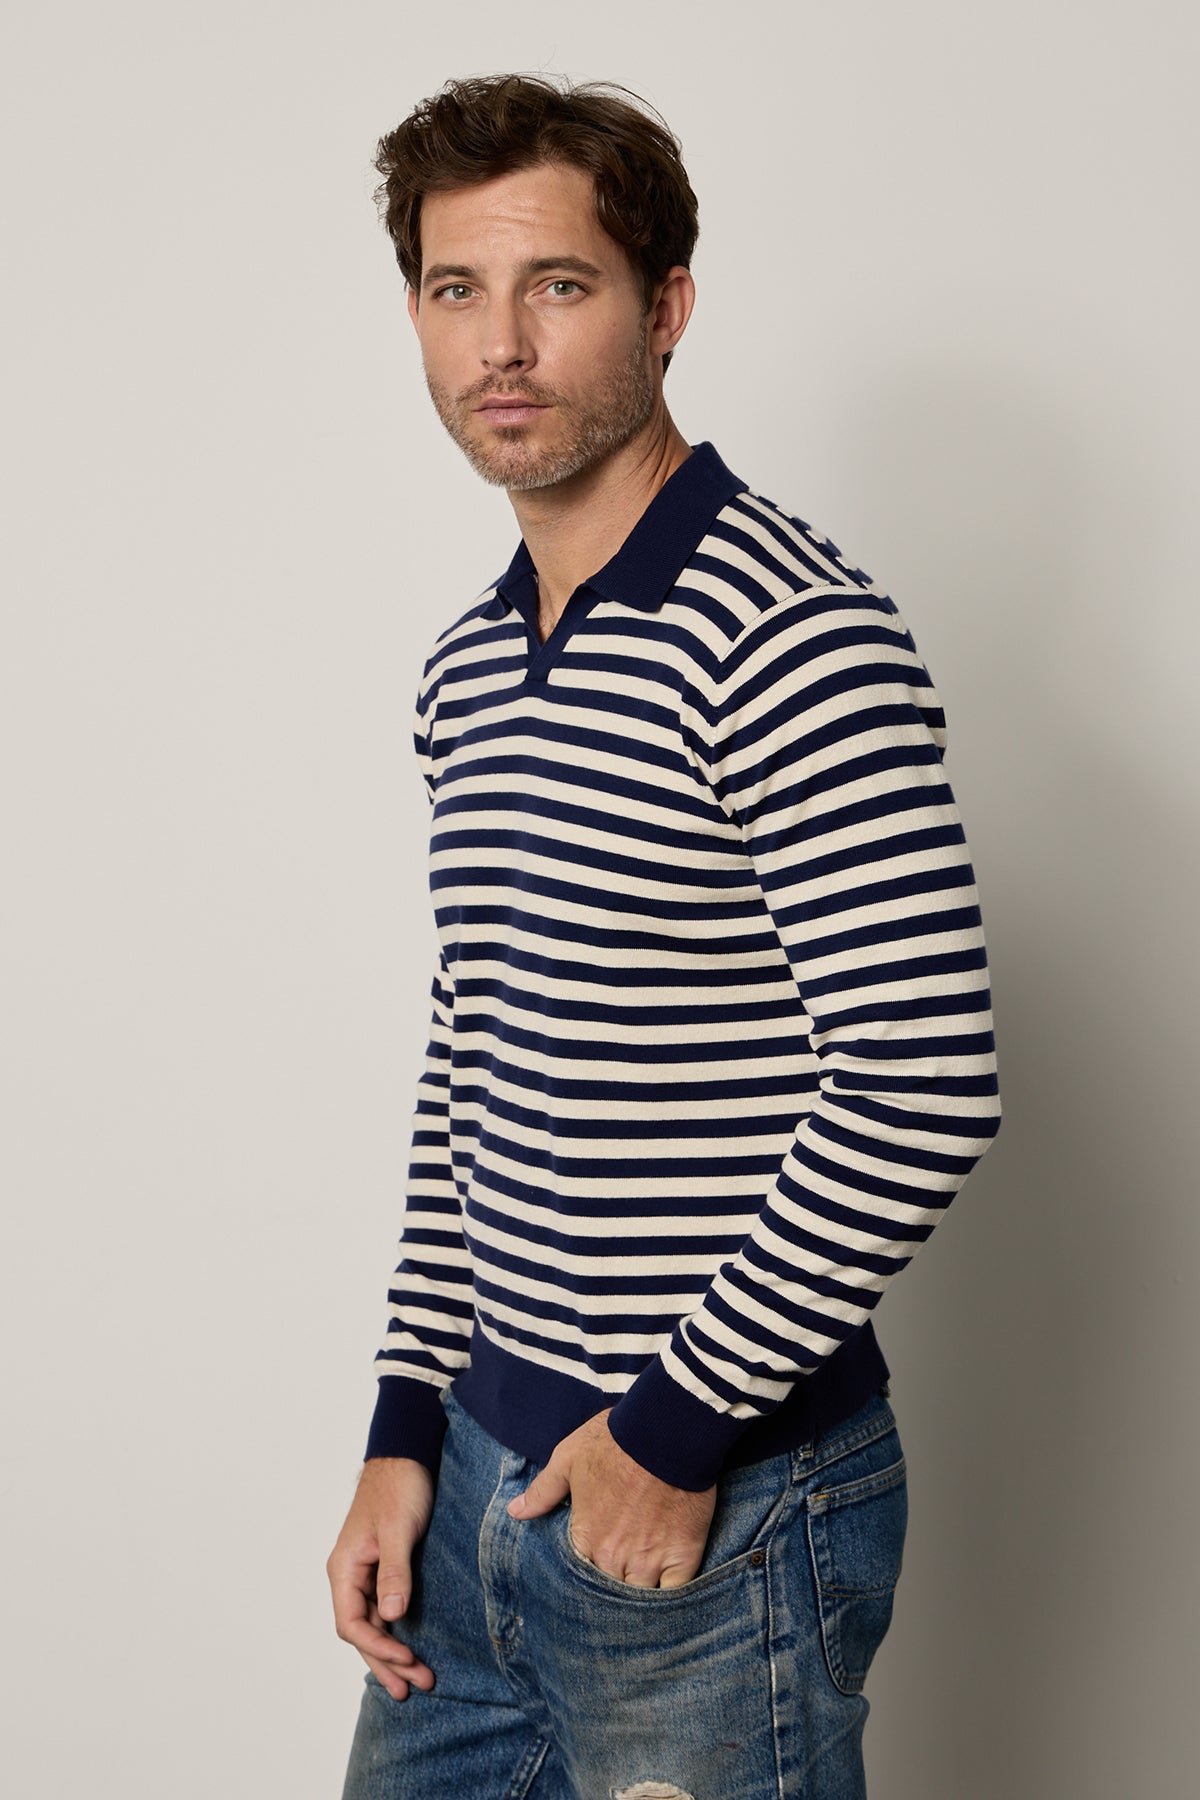 A man wearing the Velvet by Graham & Spencer Ricky striped polo shirt and jeans.-25943739891905